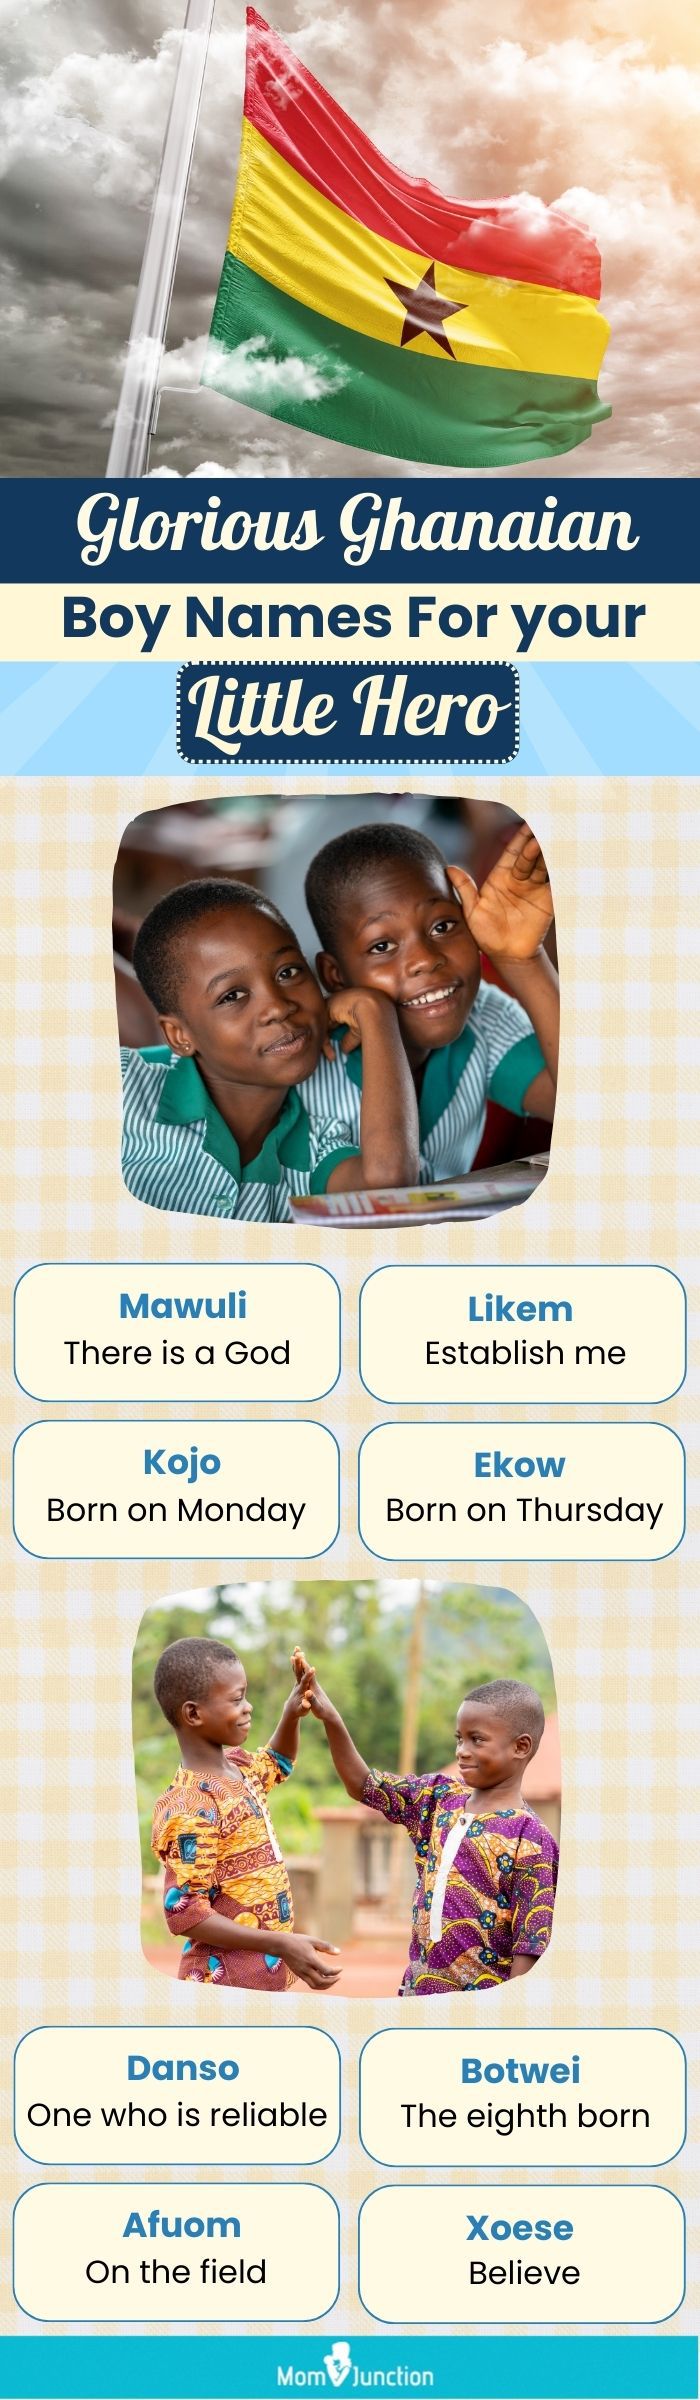 glorious ghanaian boy names for your little hero (infographic)